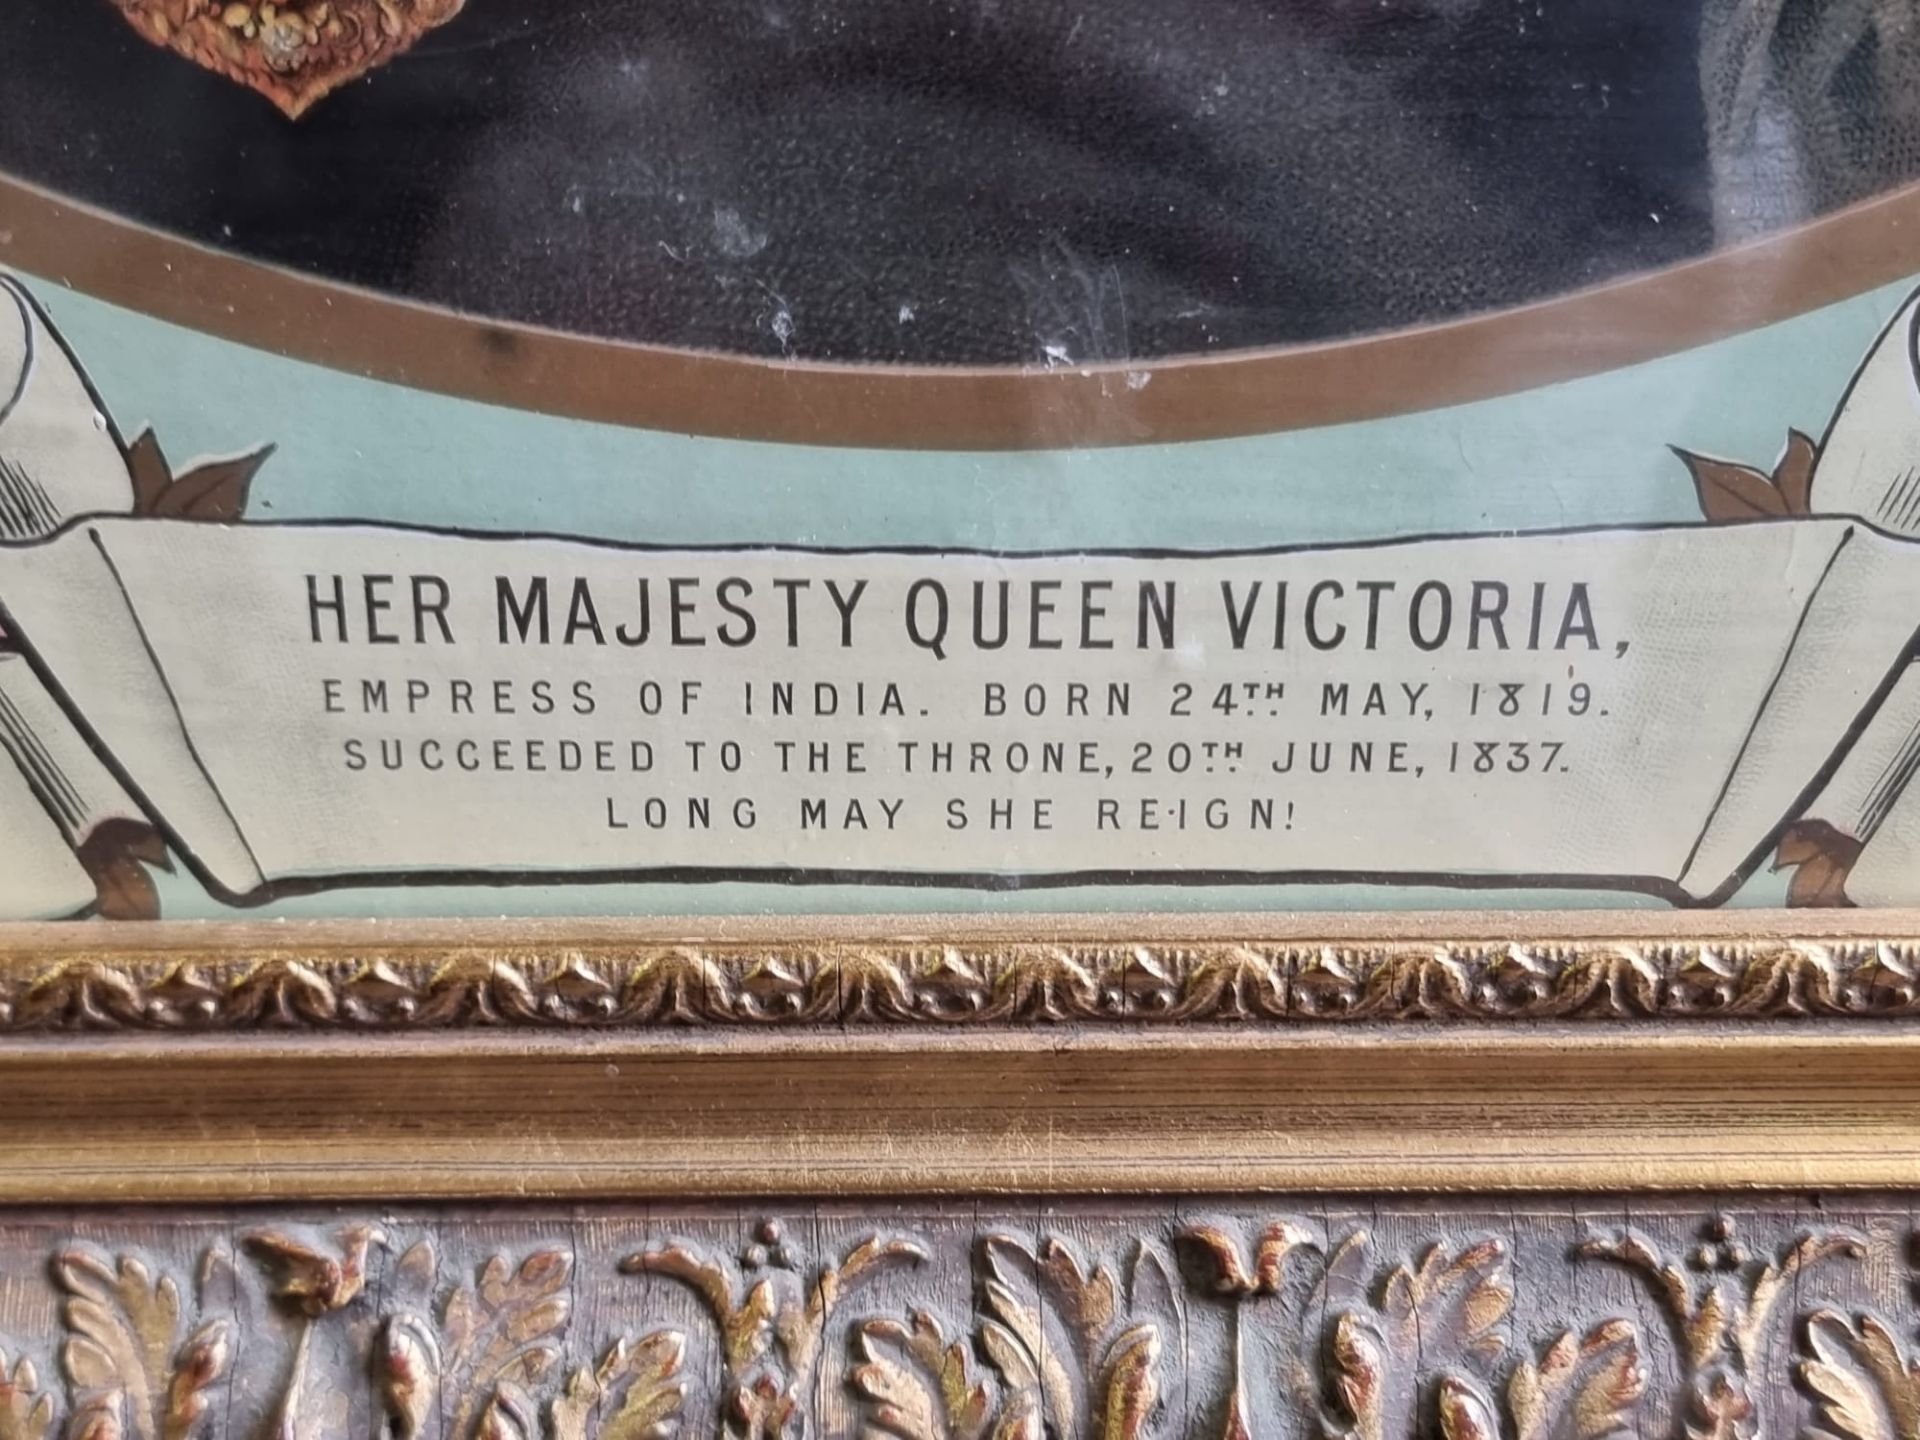 Queen Victoria Framed Print With Inscription Plate Under Her Majesty Queen Victoria Empress Of India - Image 7 of 9